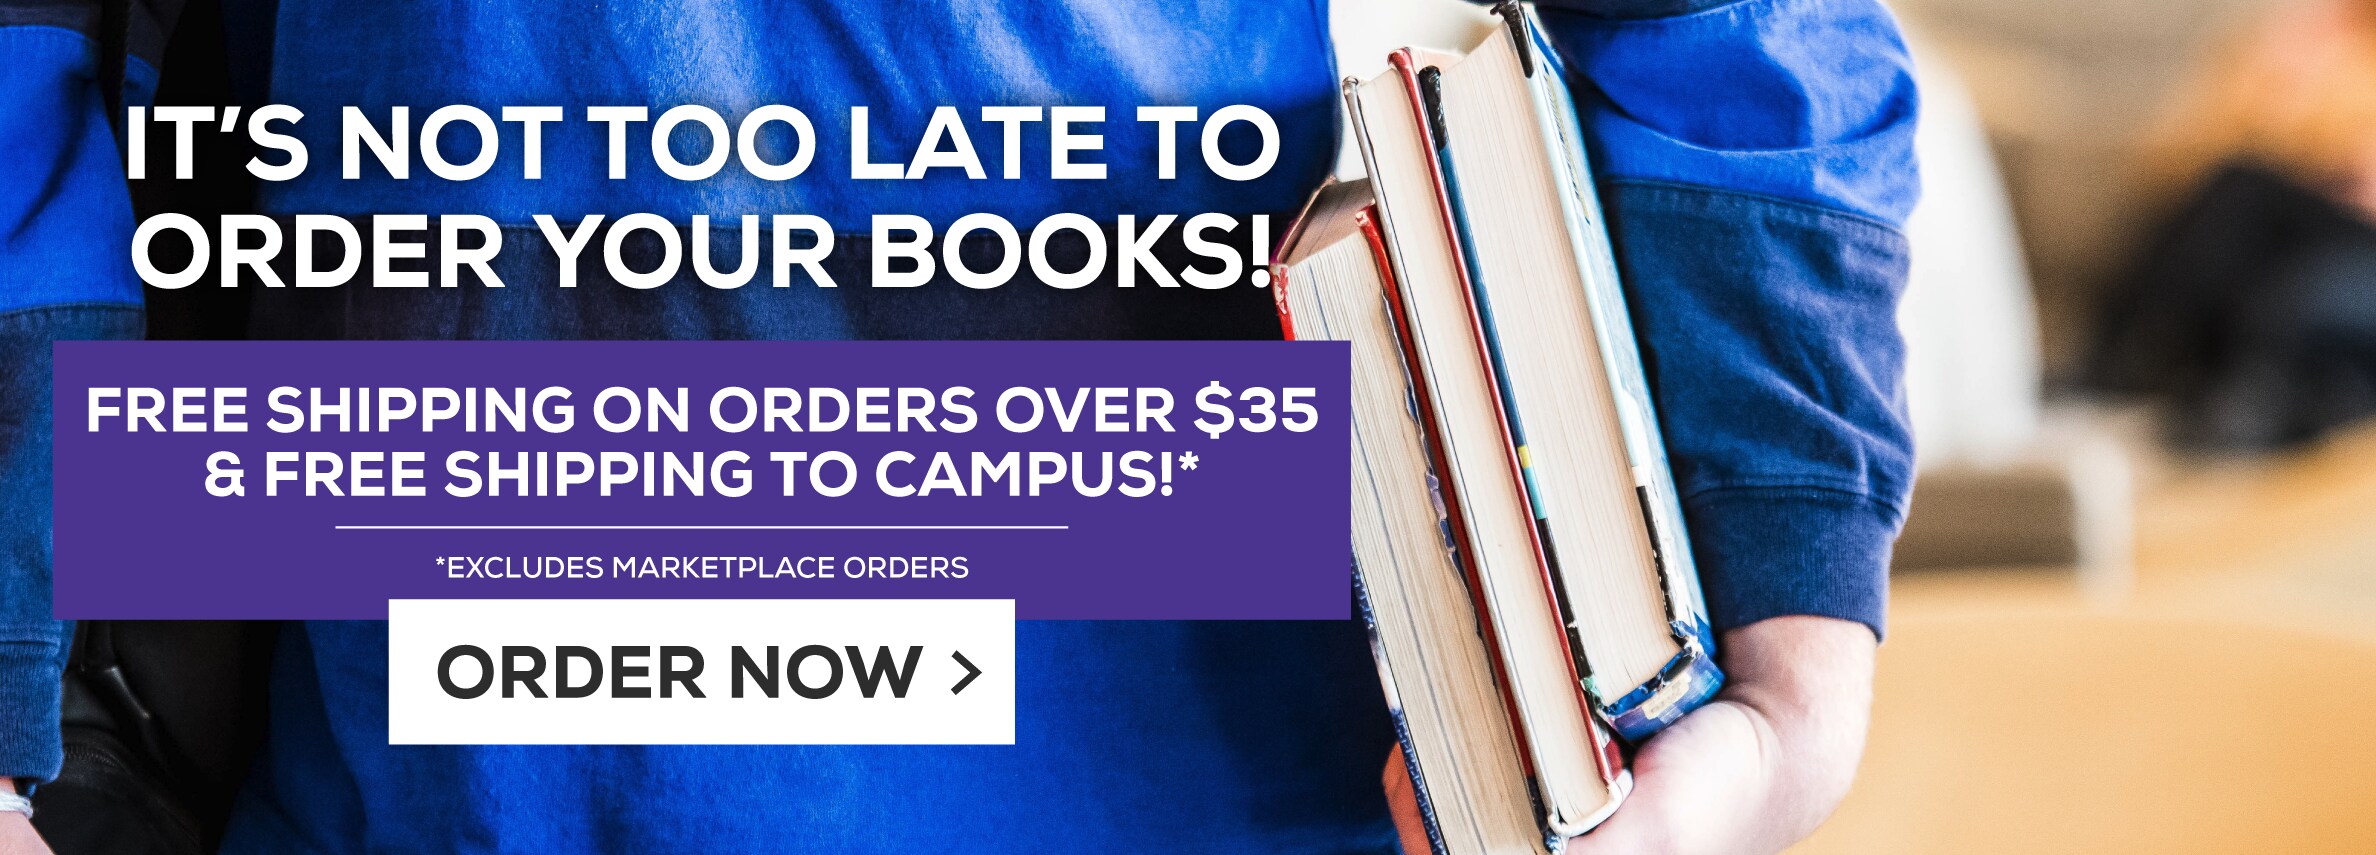 ItÃ¢â‚¬â„¢s not too late to order your books! Free shipping on orders over $35 and free shipping to campus!* Excludes marketplace purchases. Order Now.